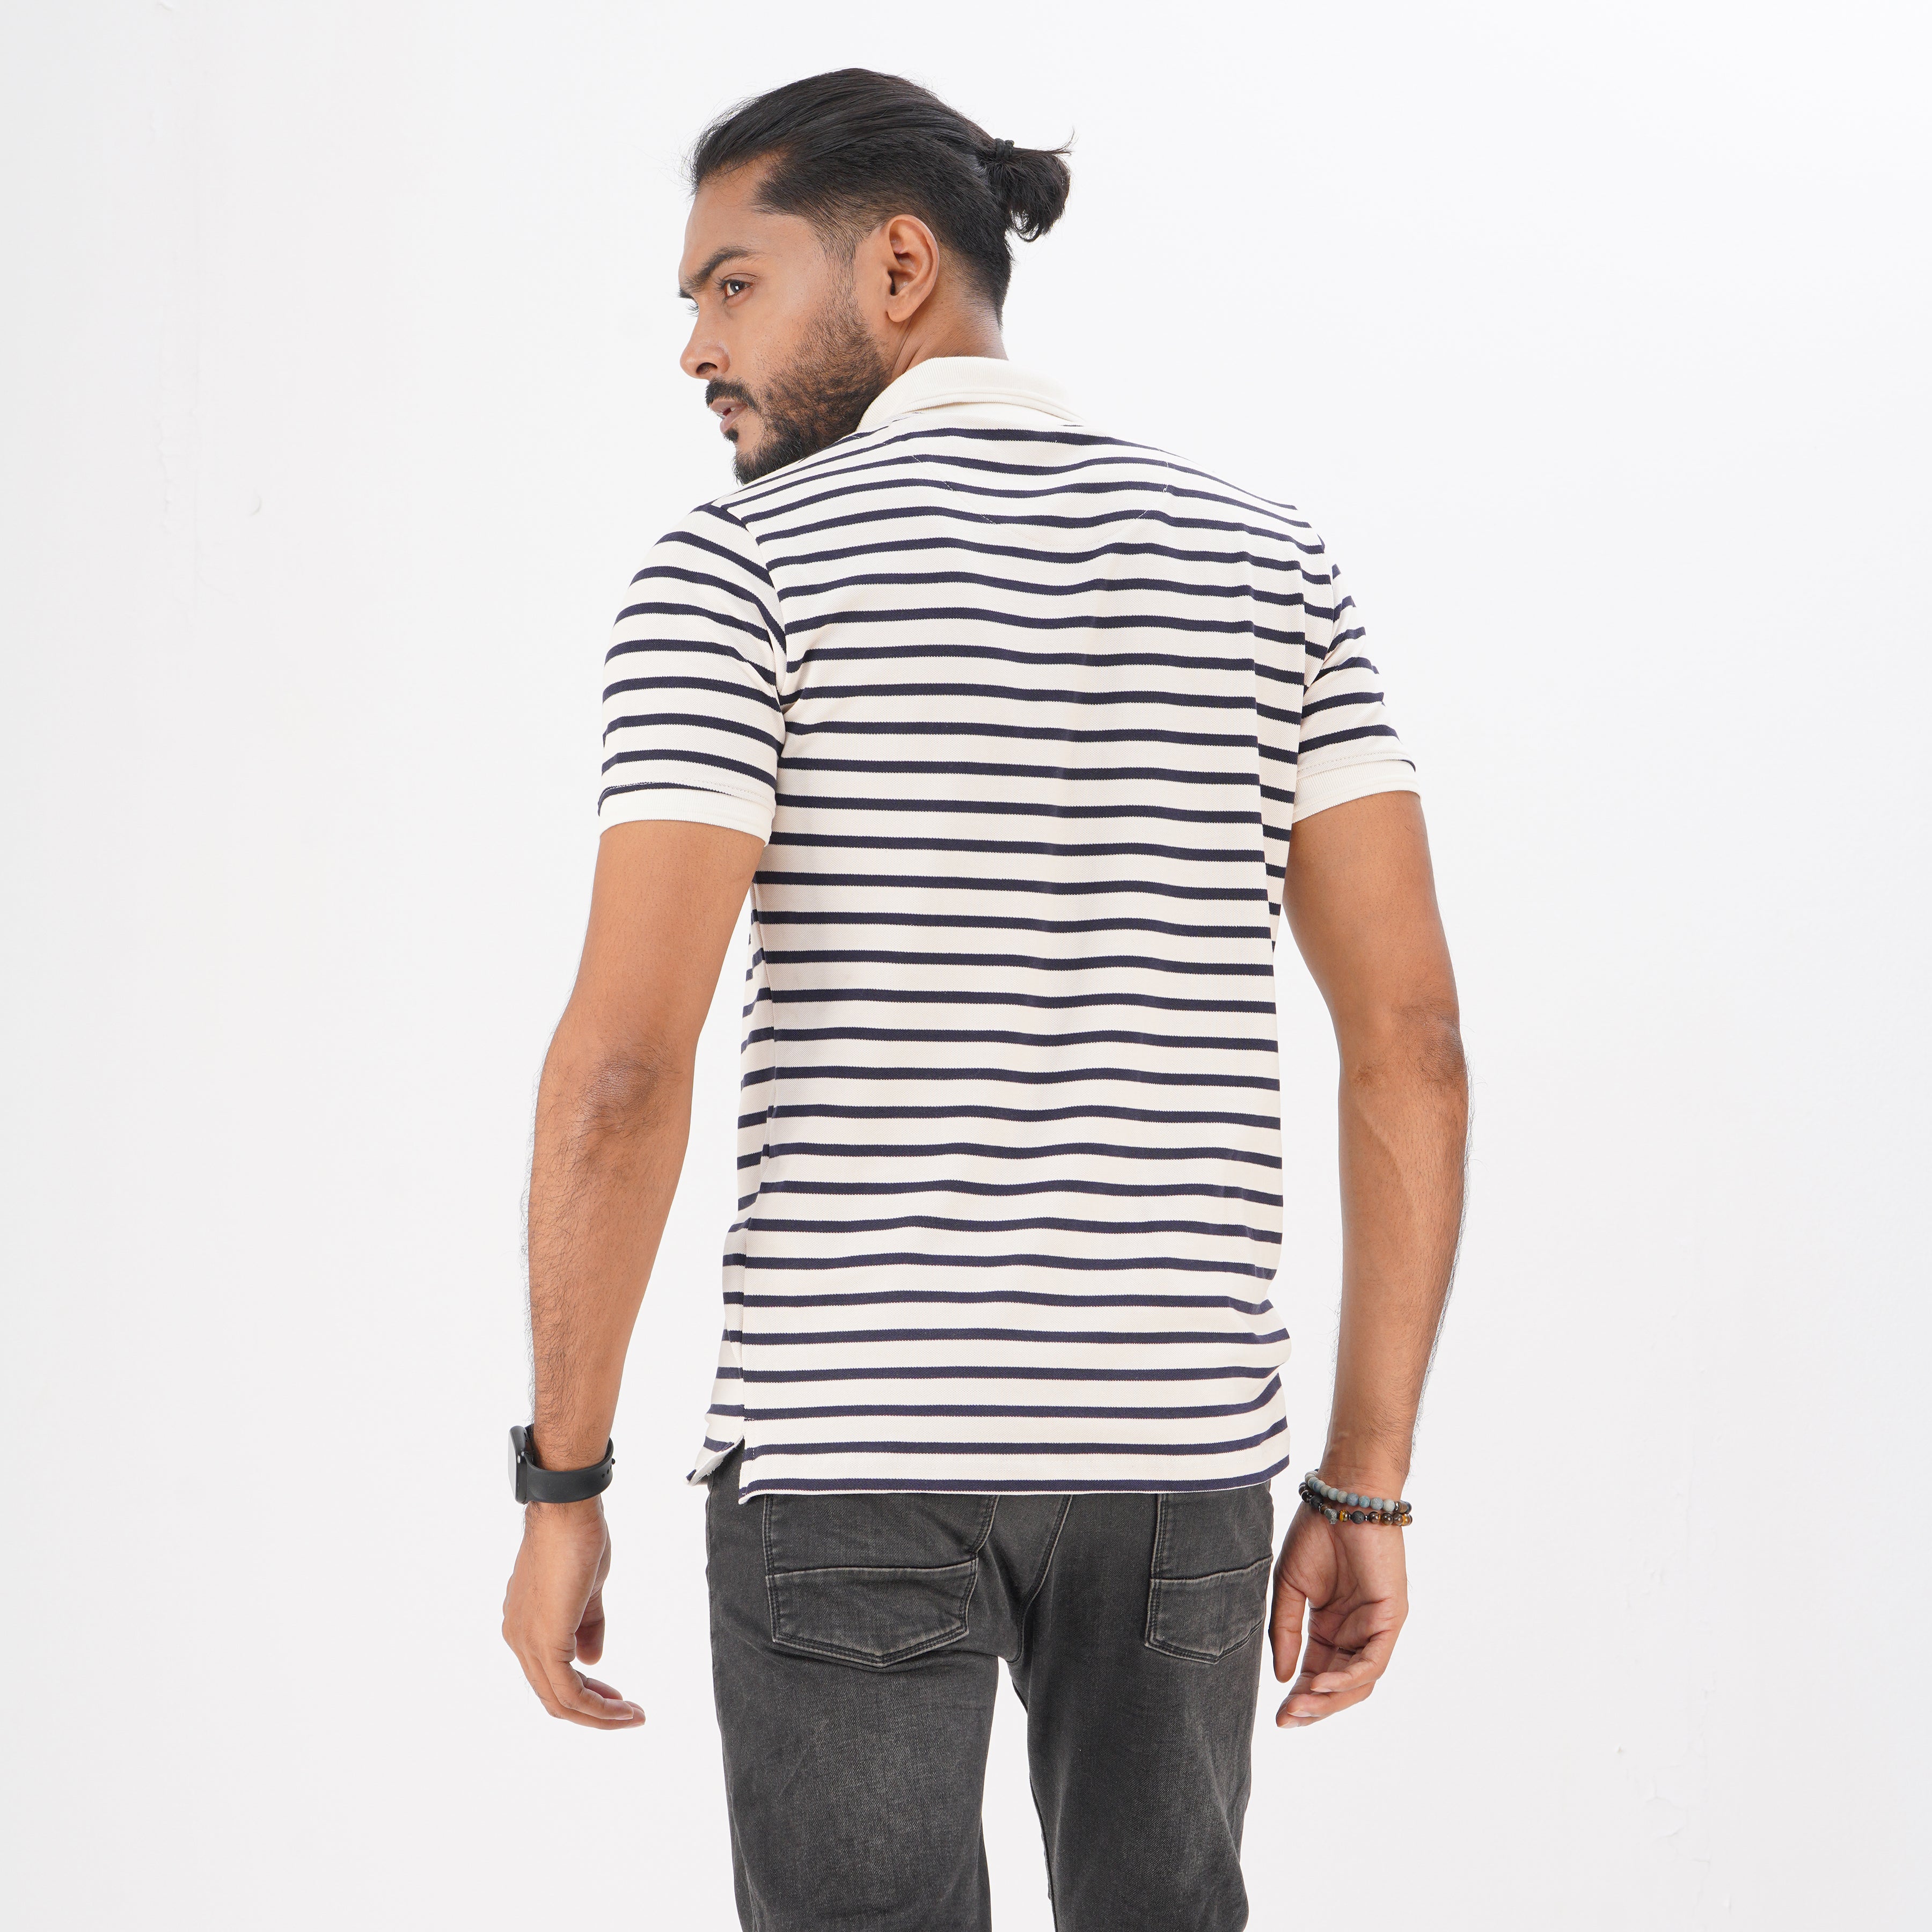  View details for Polo Shirt for Men | White black stripe Polo Polo Shirt for Men | White black stripe Polo